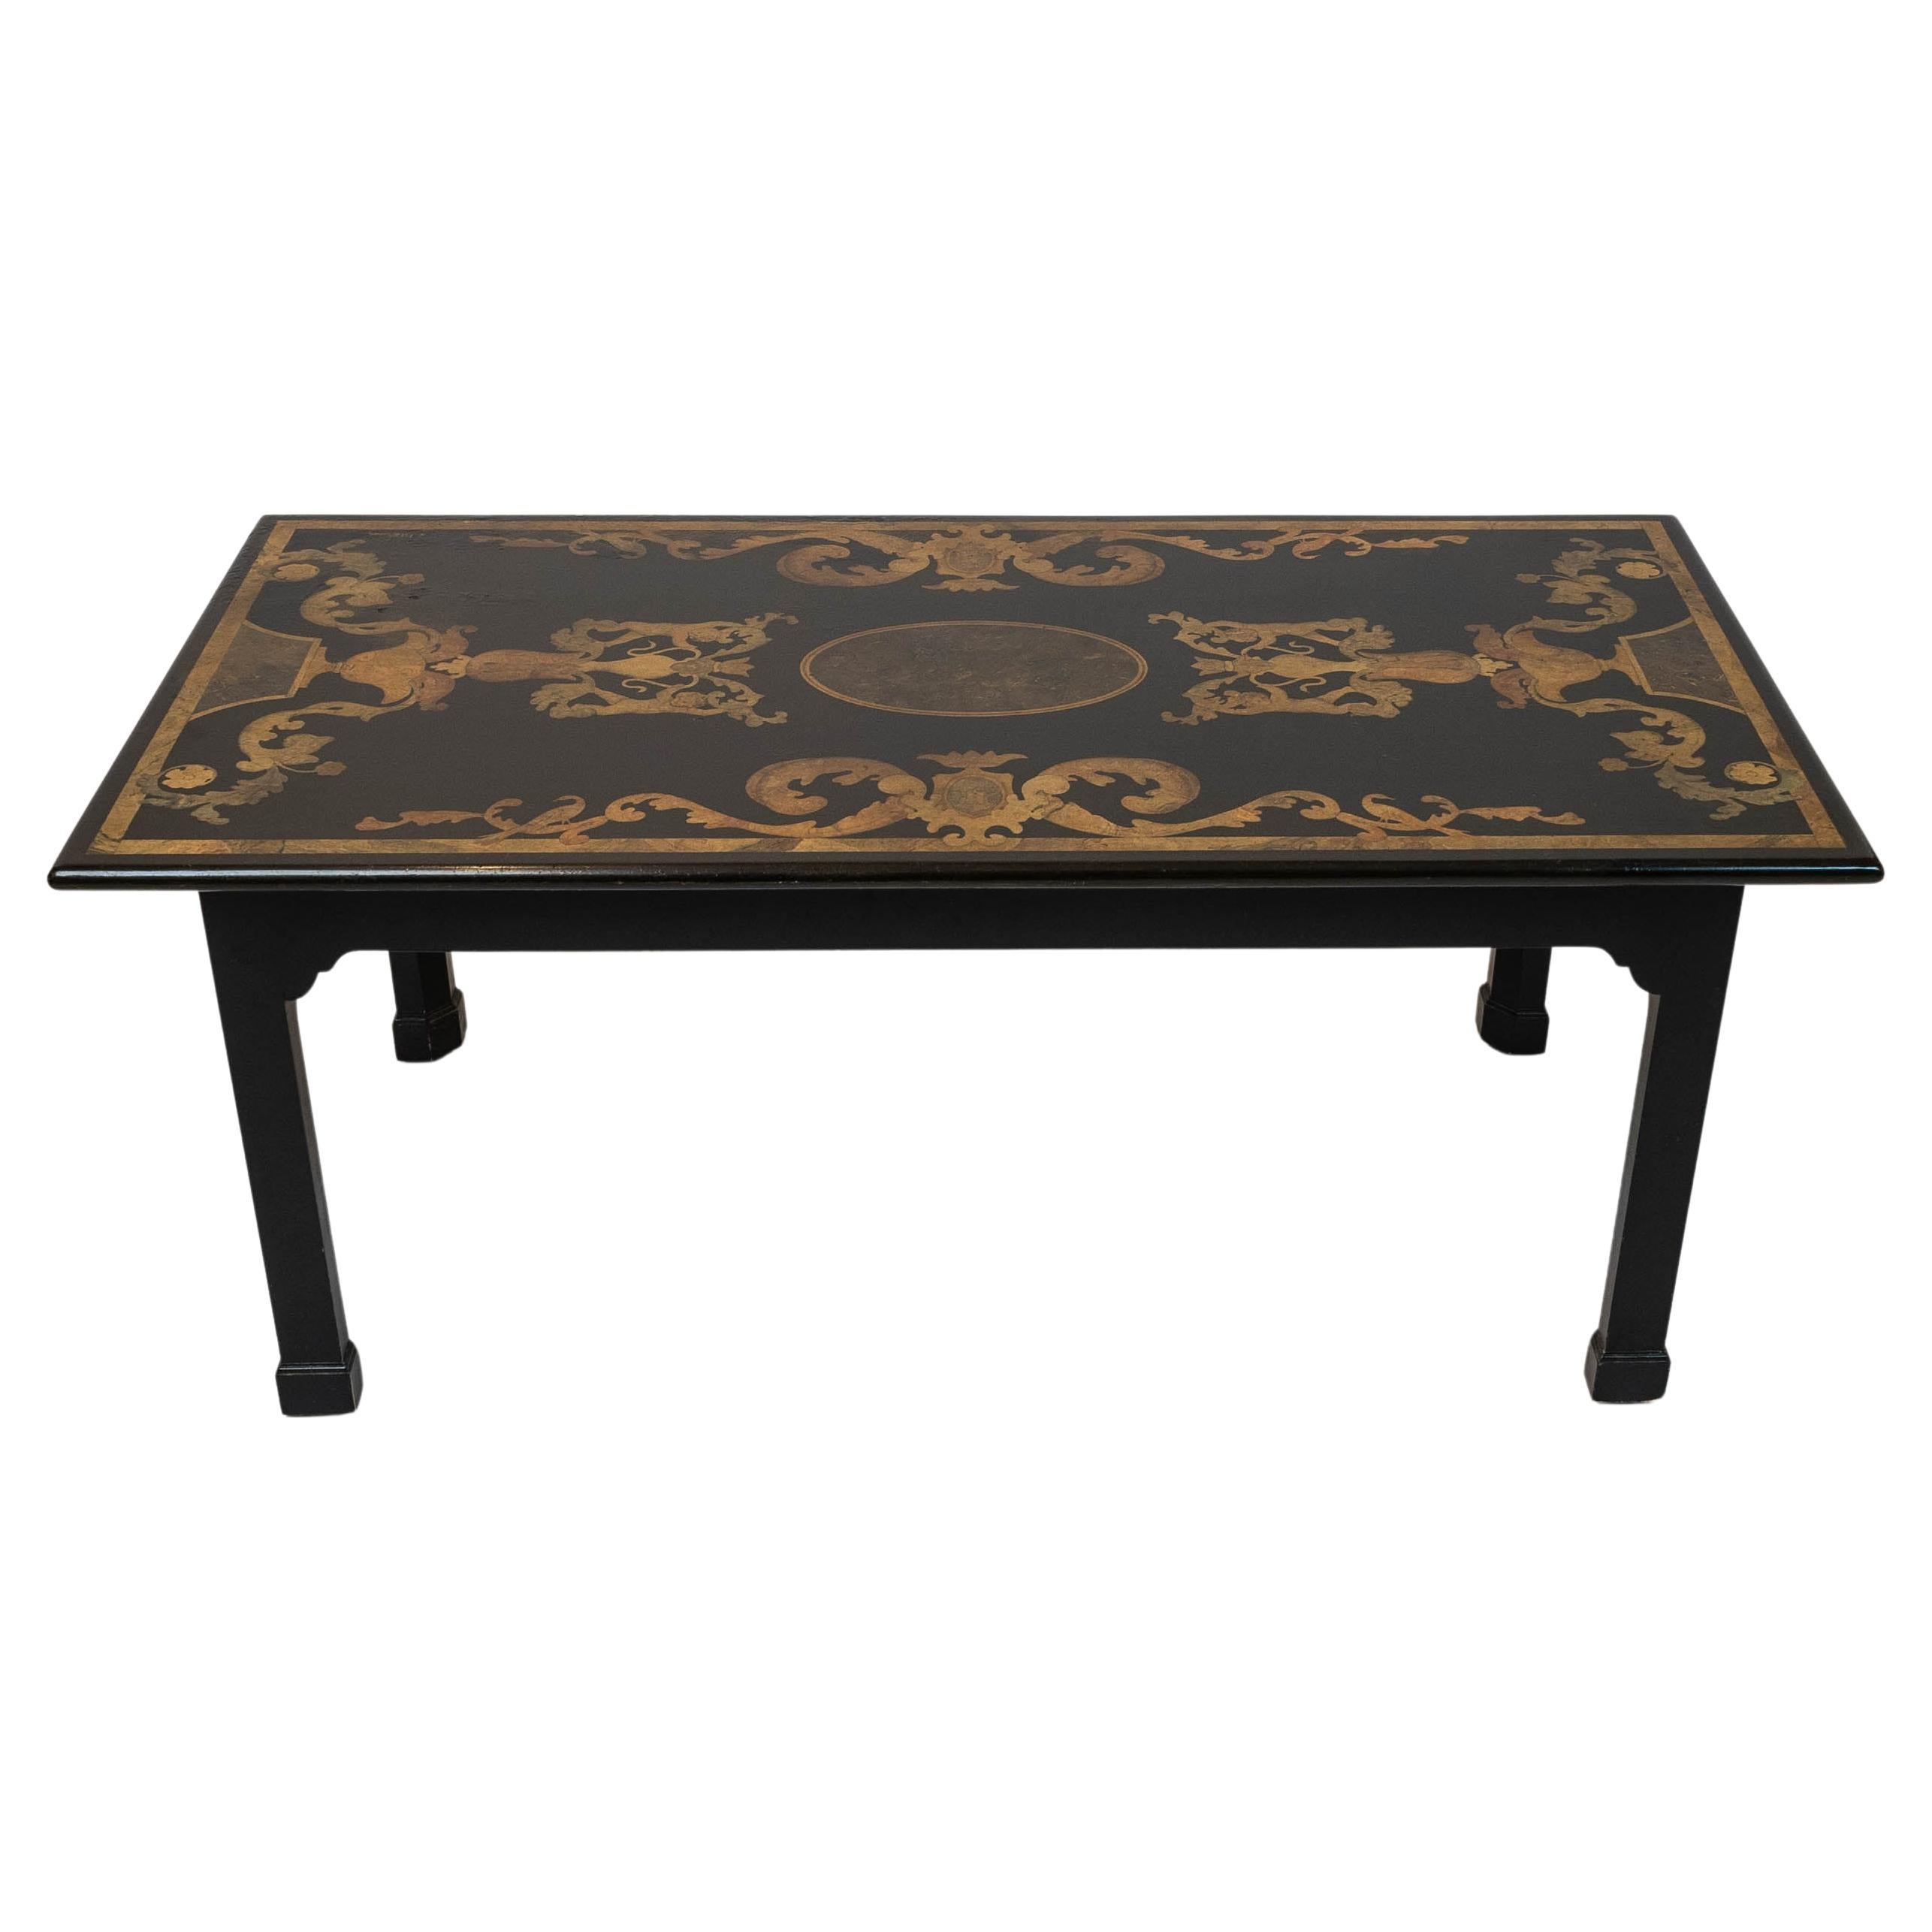 Vintage Neoclassical Style Slate Top Hand Painted Coffee Table For Sale